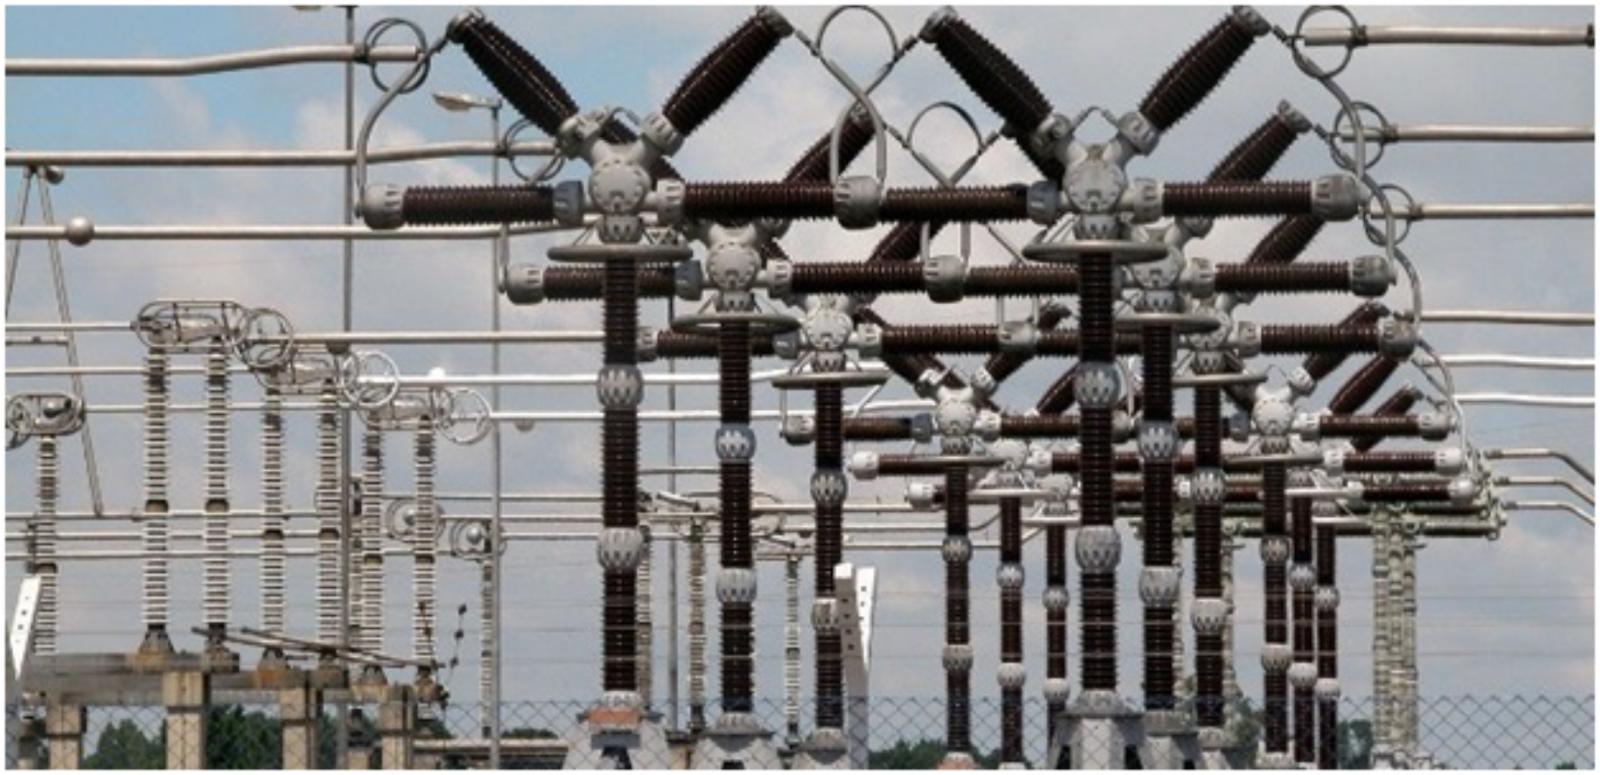 Nigeria in darkness as electricity grid collapses again